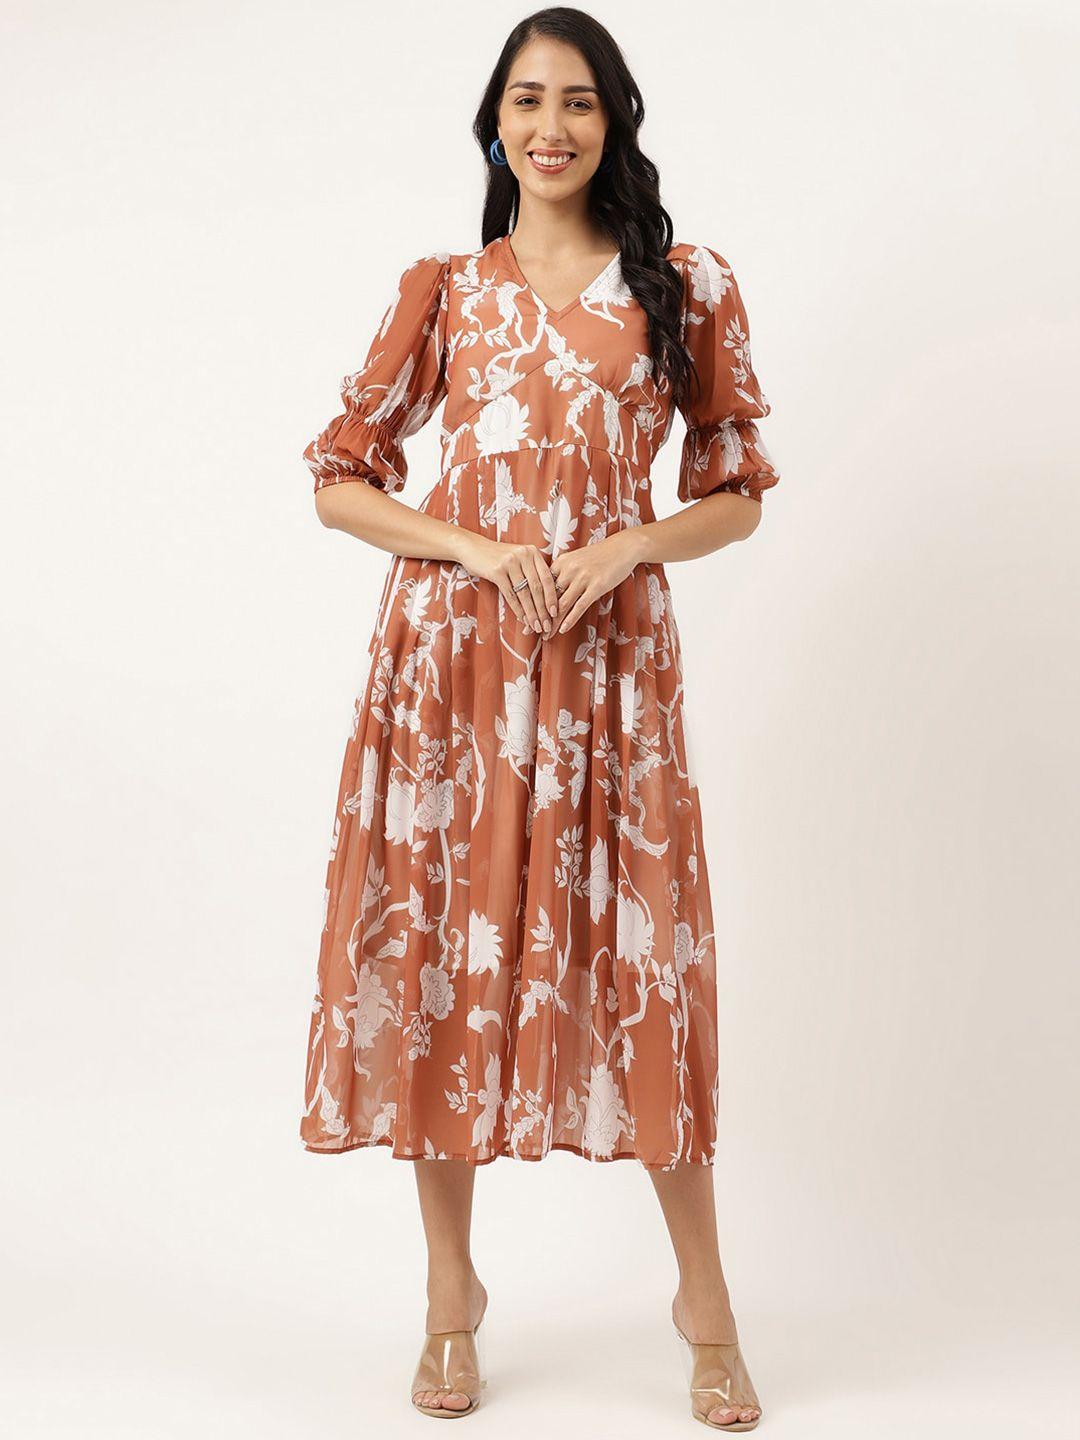 masakali.co floral printed puff sleeves georgette empire midi dress